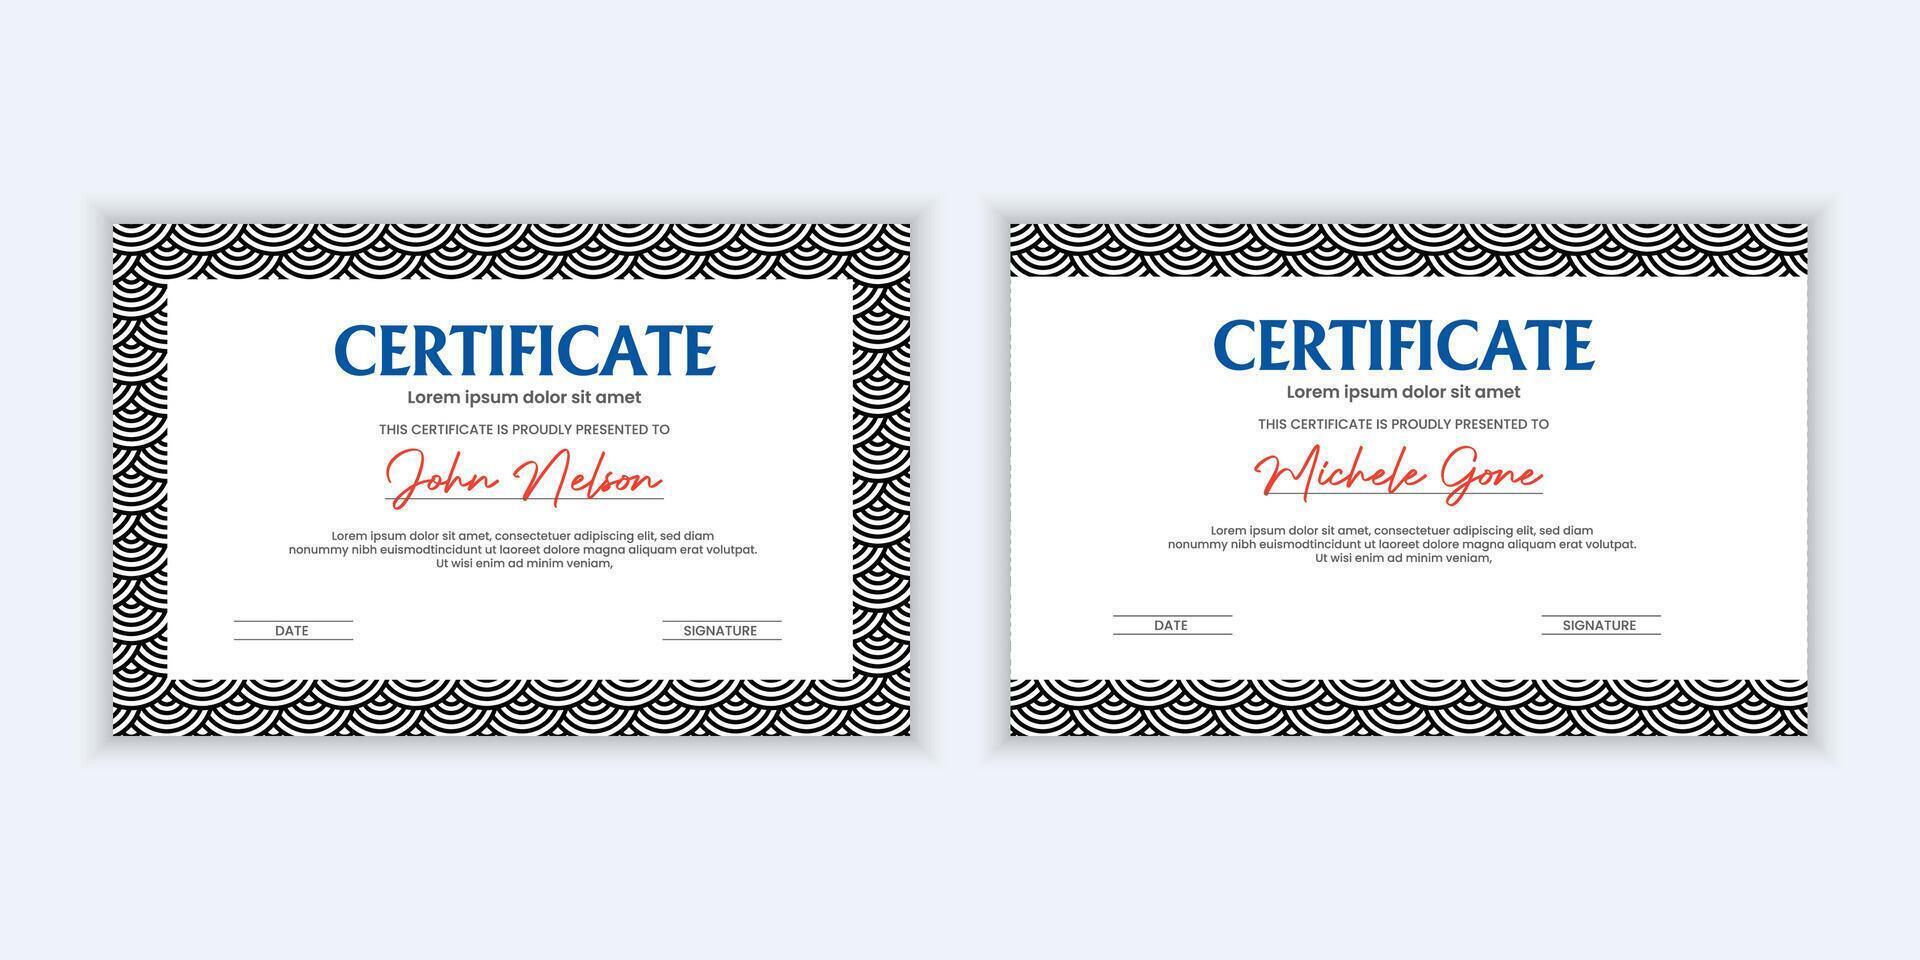 Certificate. Template diploma currency border. Award background Gift voucher. vector